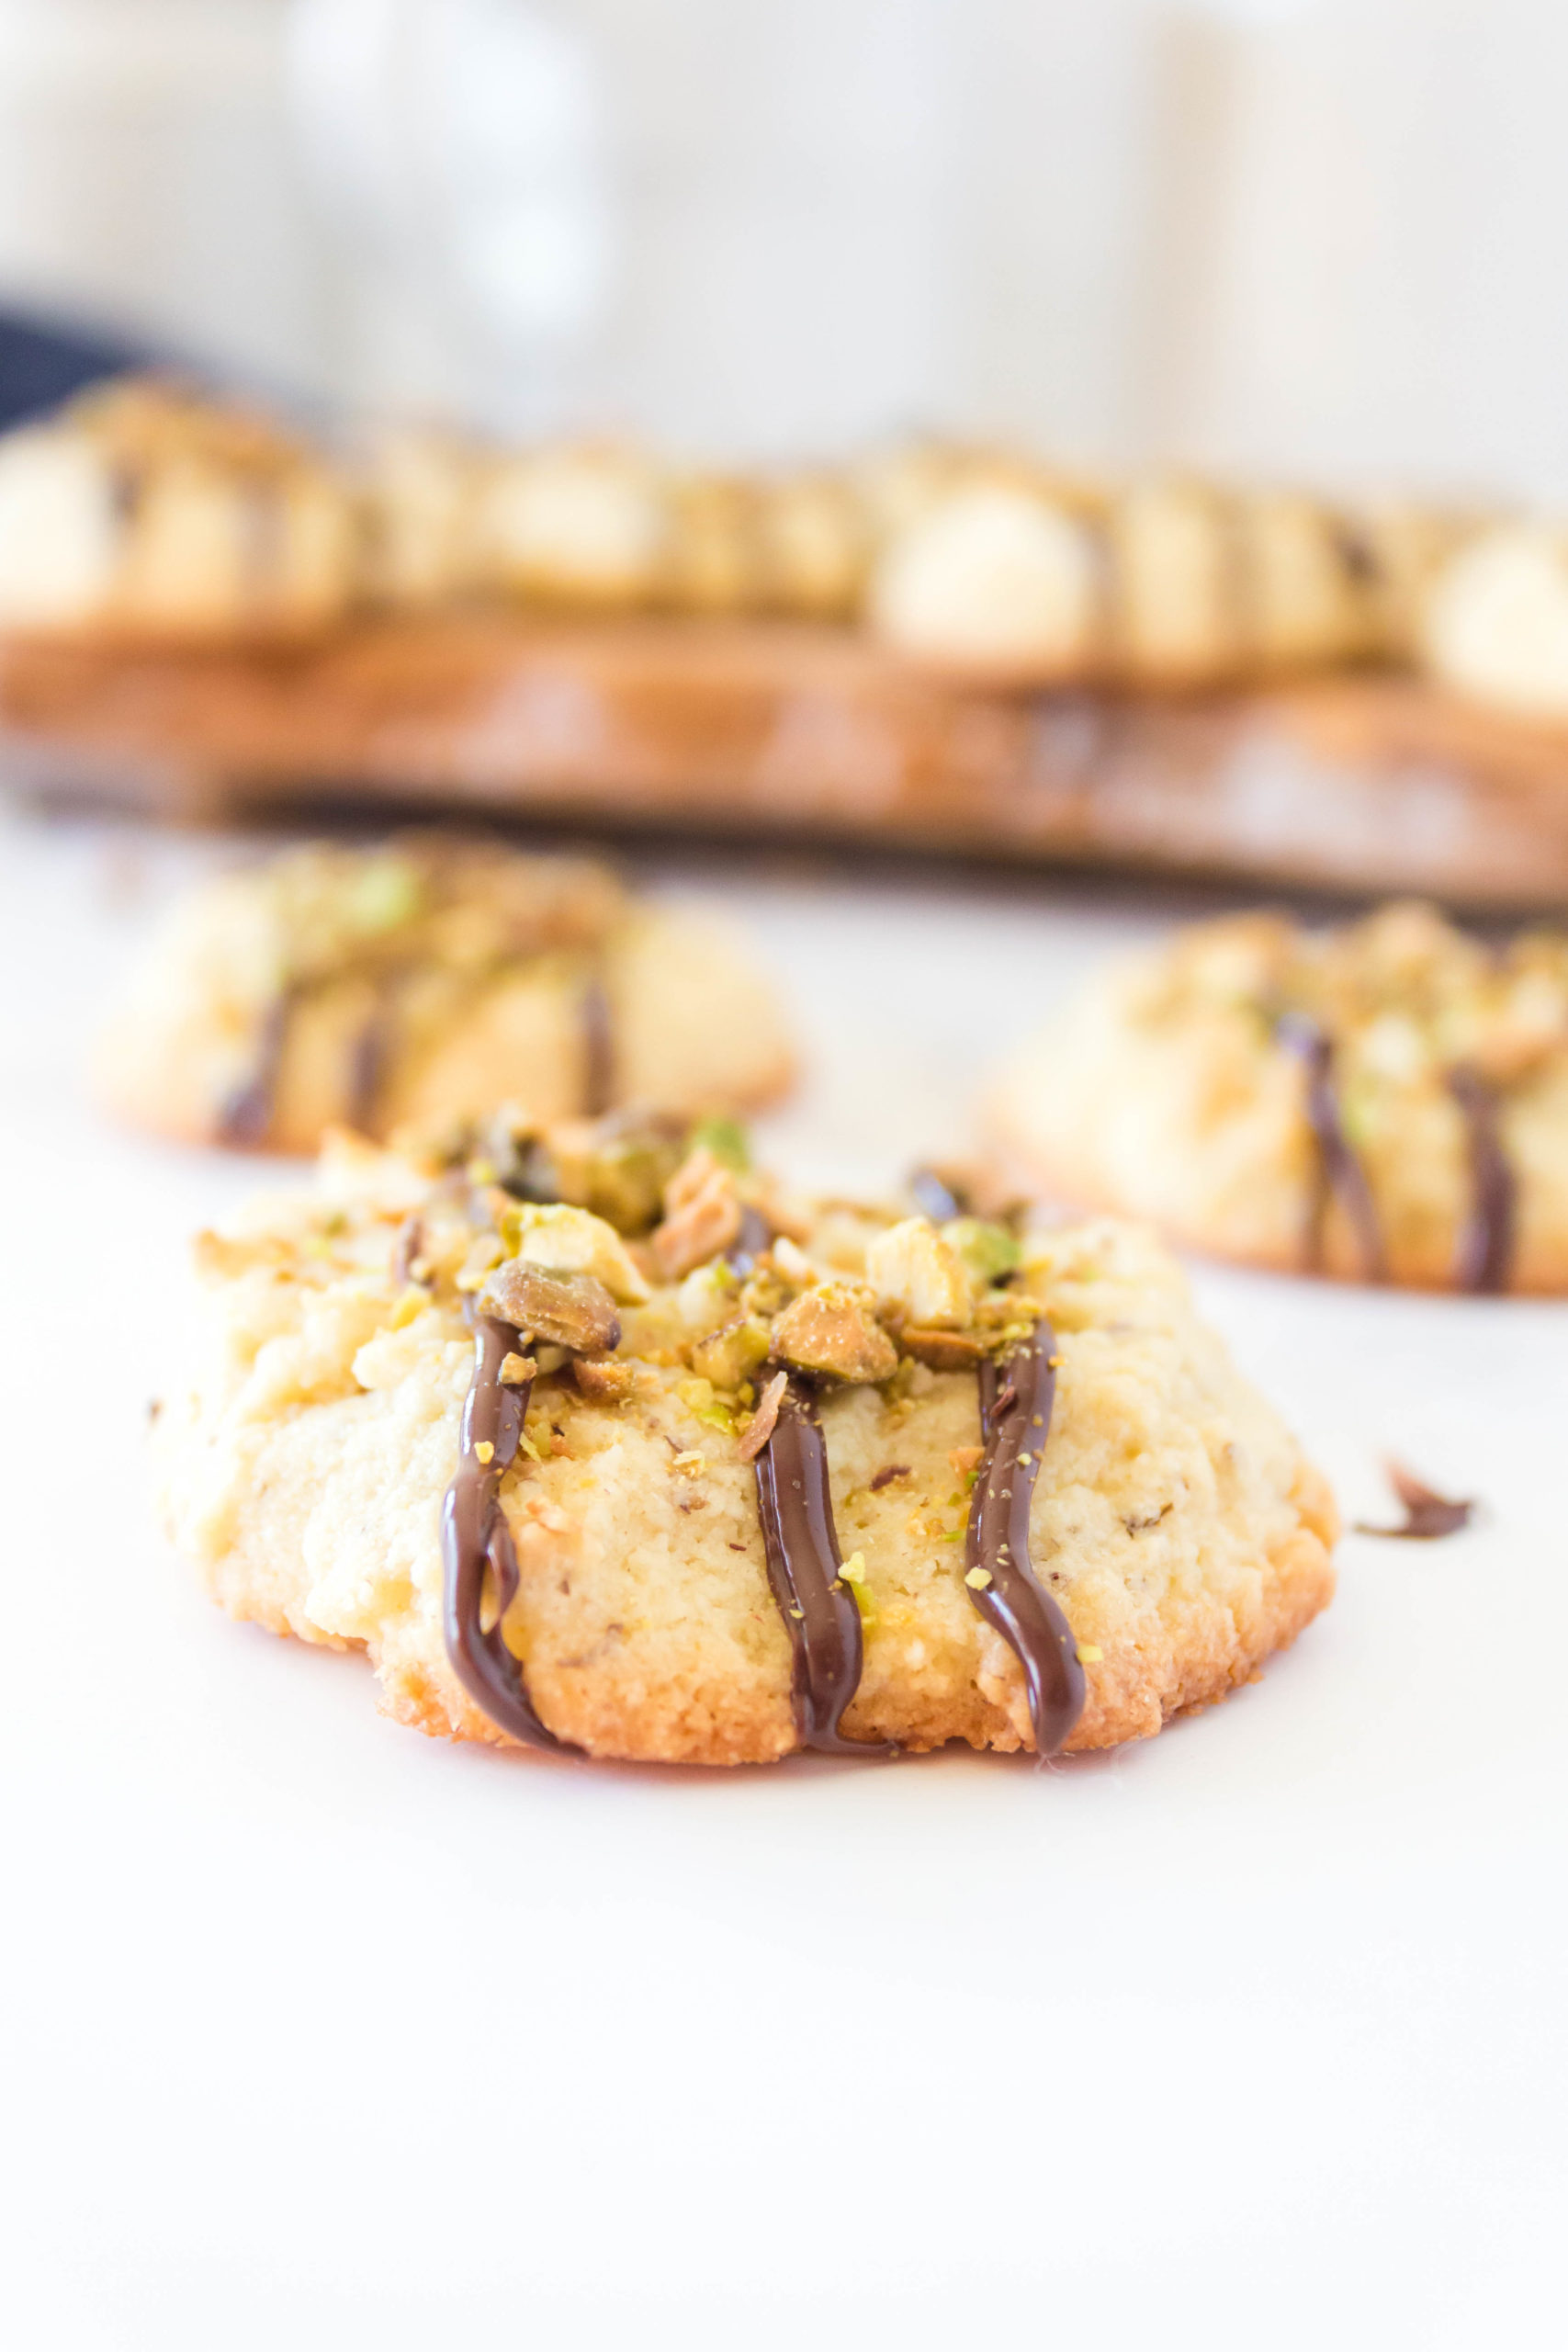 One cookie with drizzled chocolate and chopped pistachios in top with others in the background.